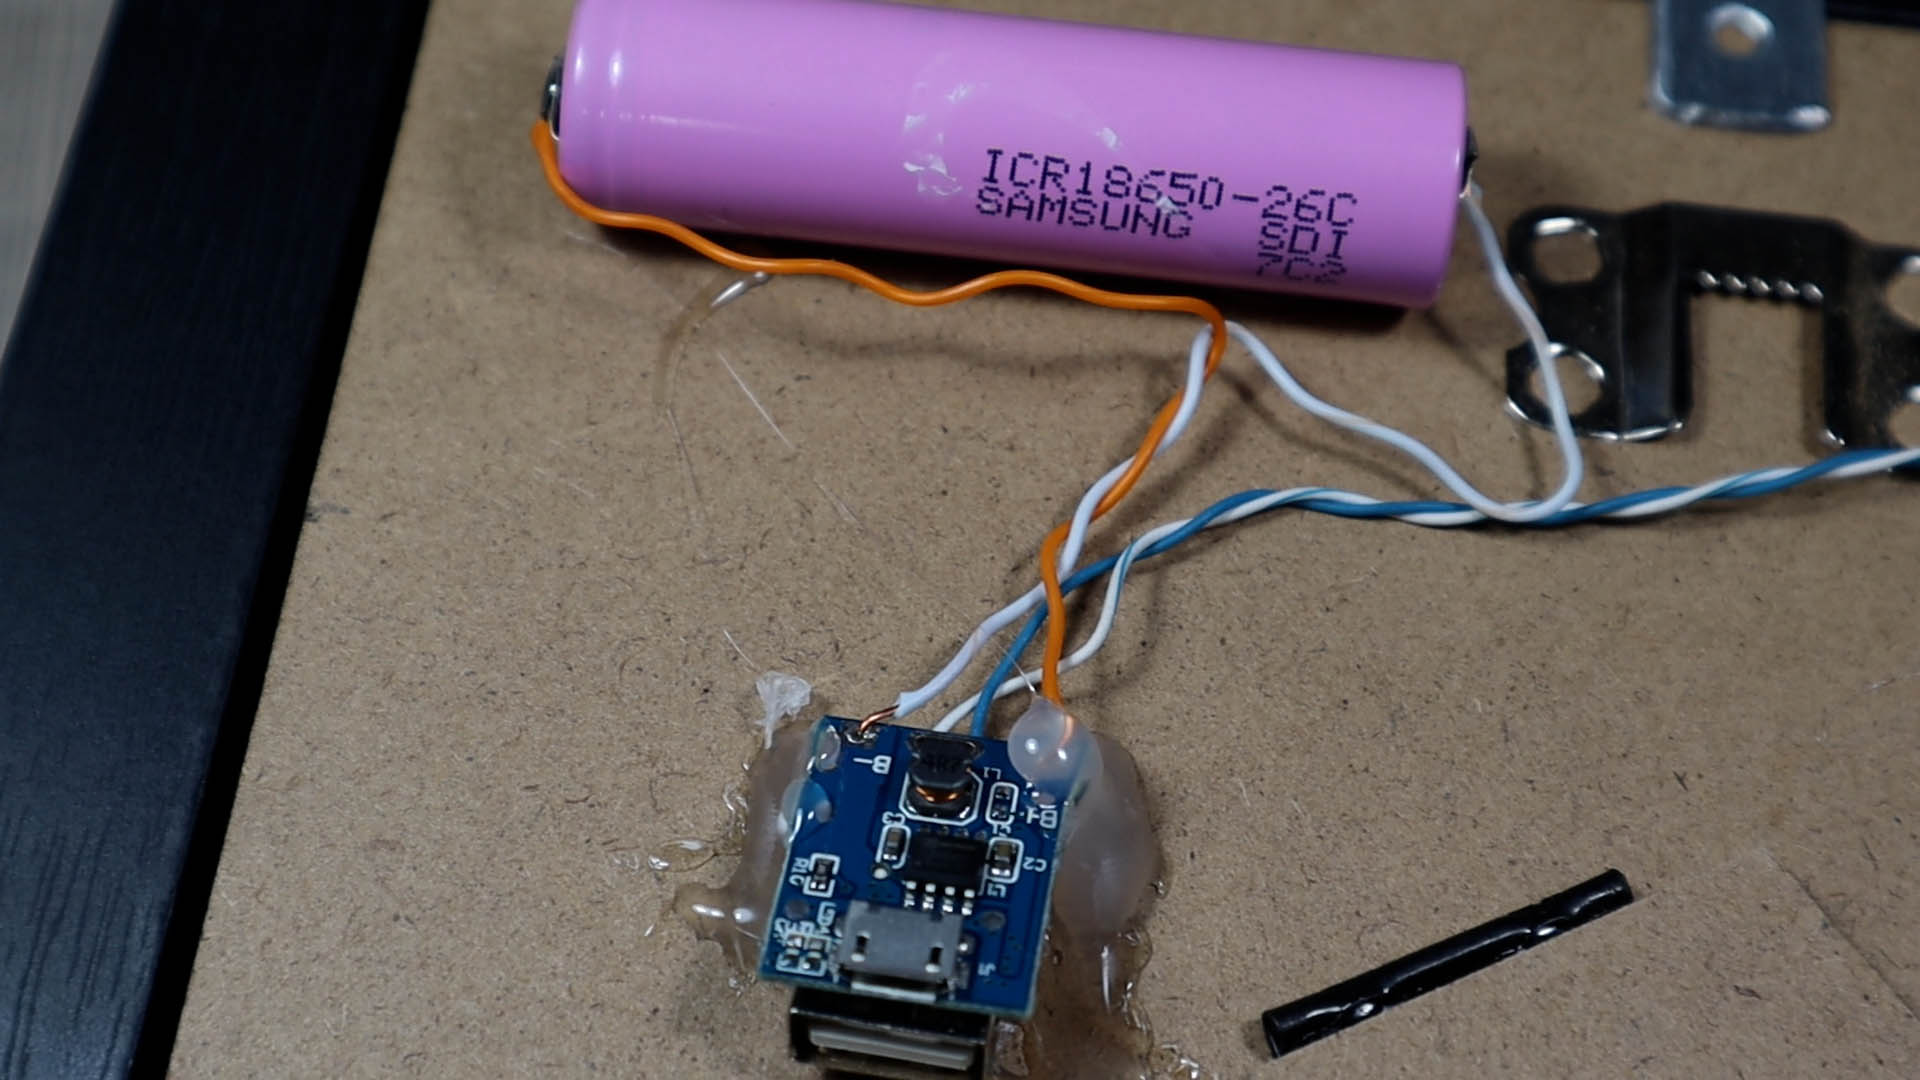 The battery is held by a mess of hot glue